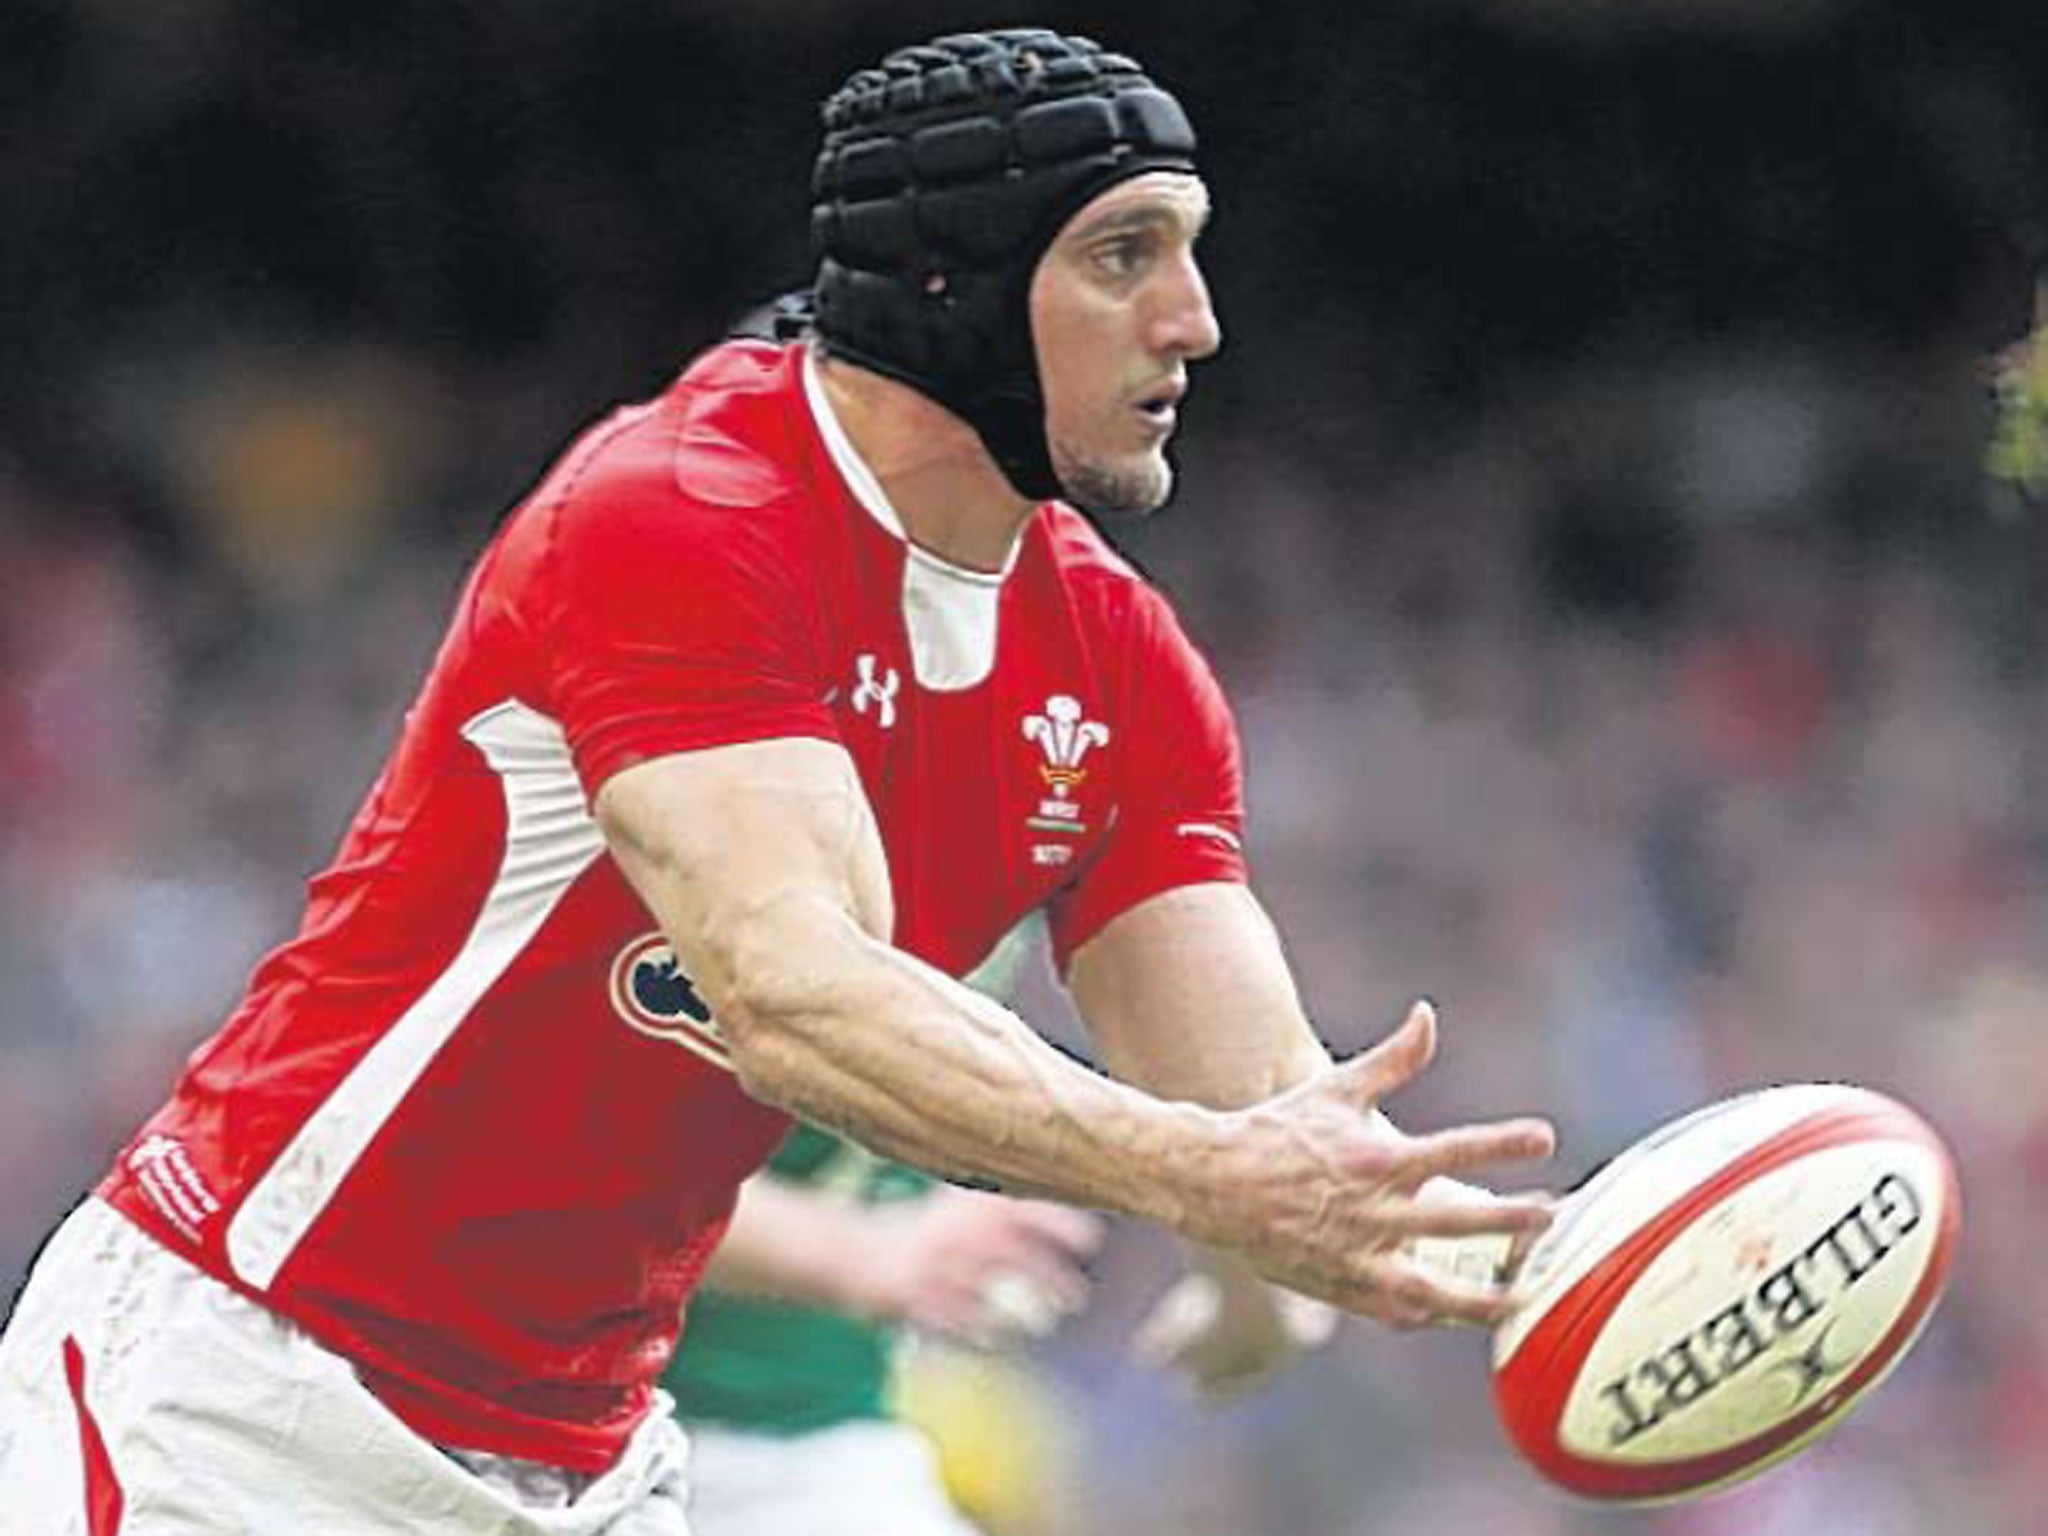 Flanker Sam Warburton is staying calm despite not regaining his Wales place after injury